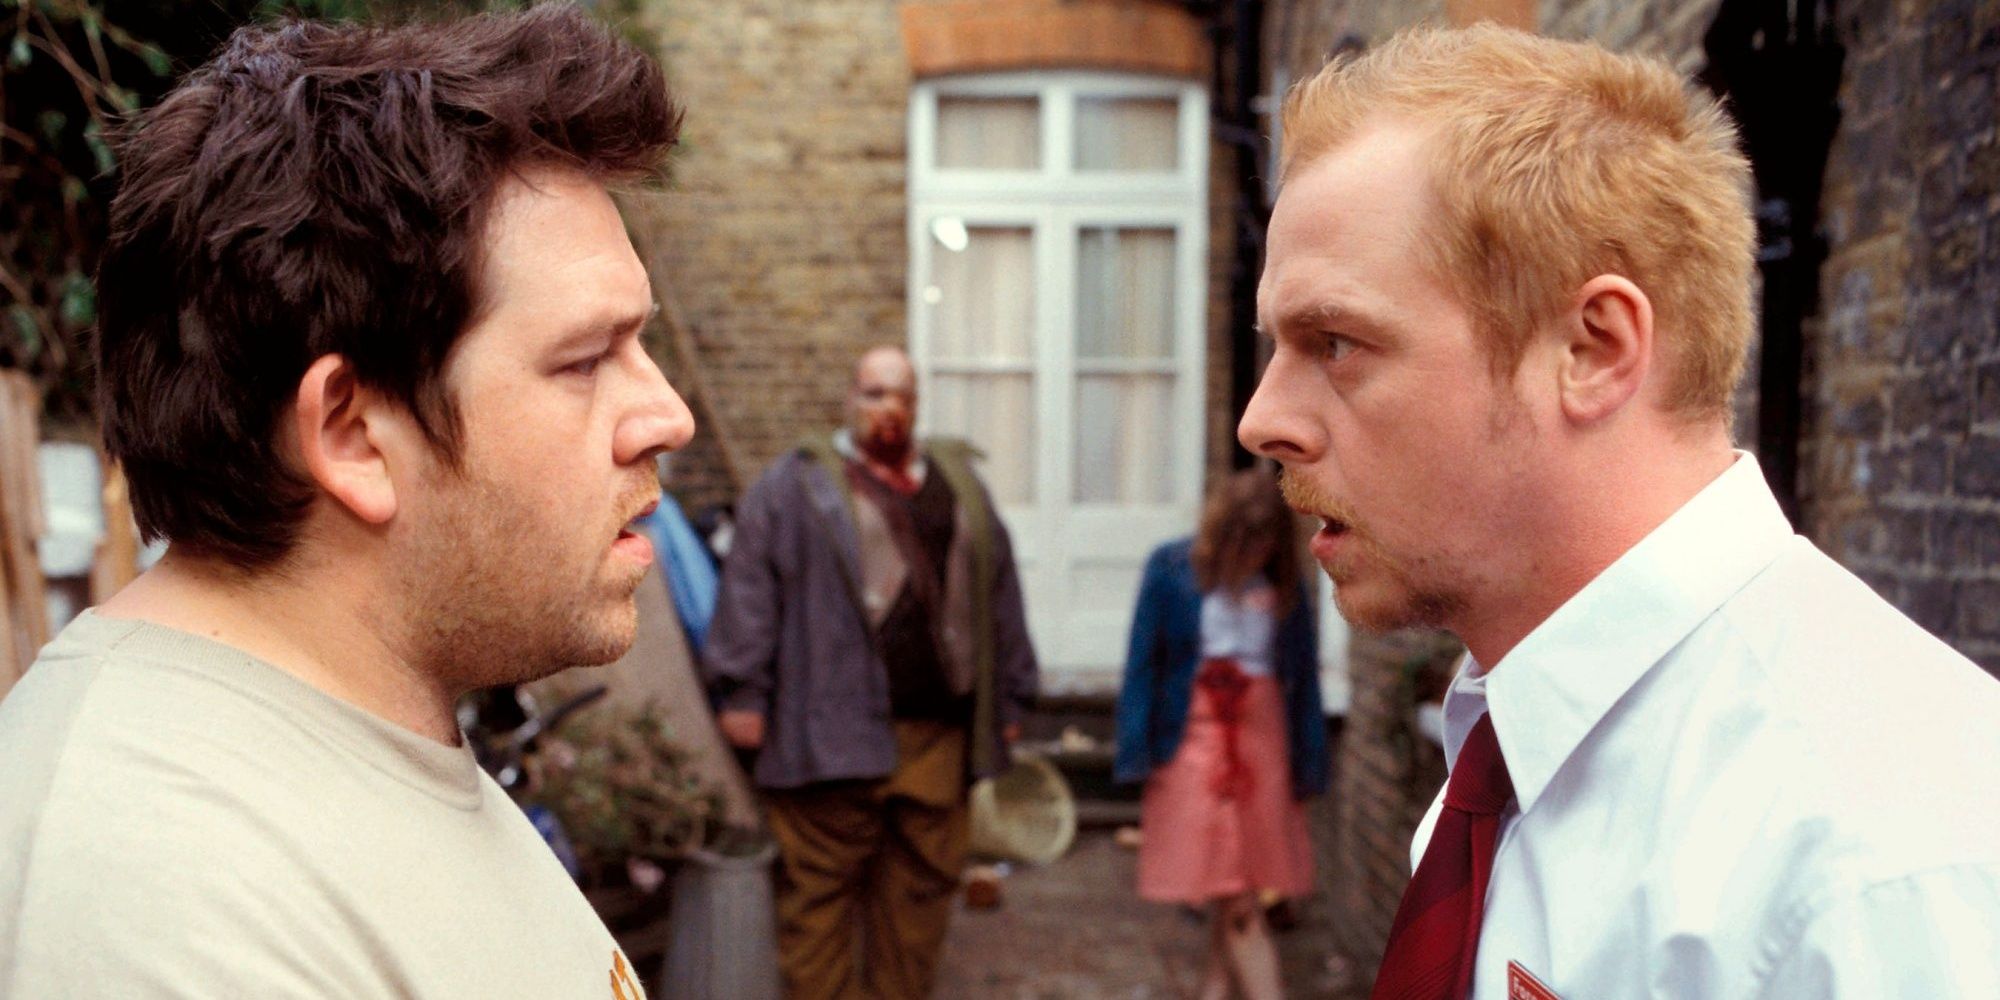 Ed and Shaun talking to each other in Shaun of the Dead